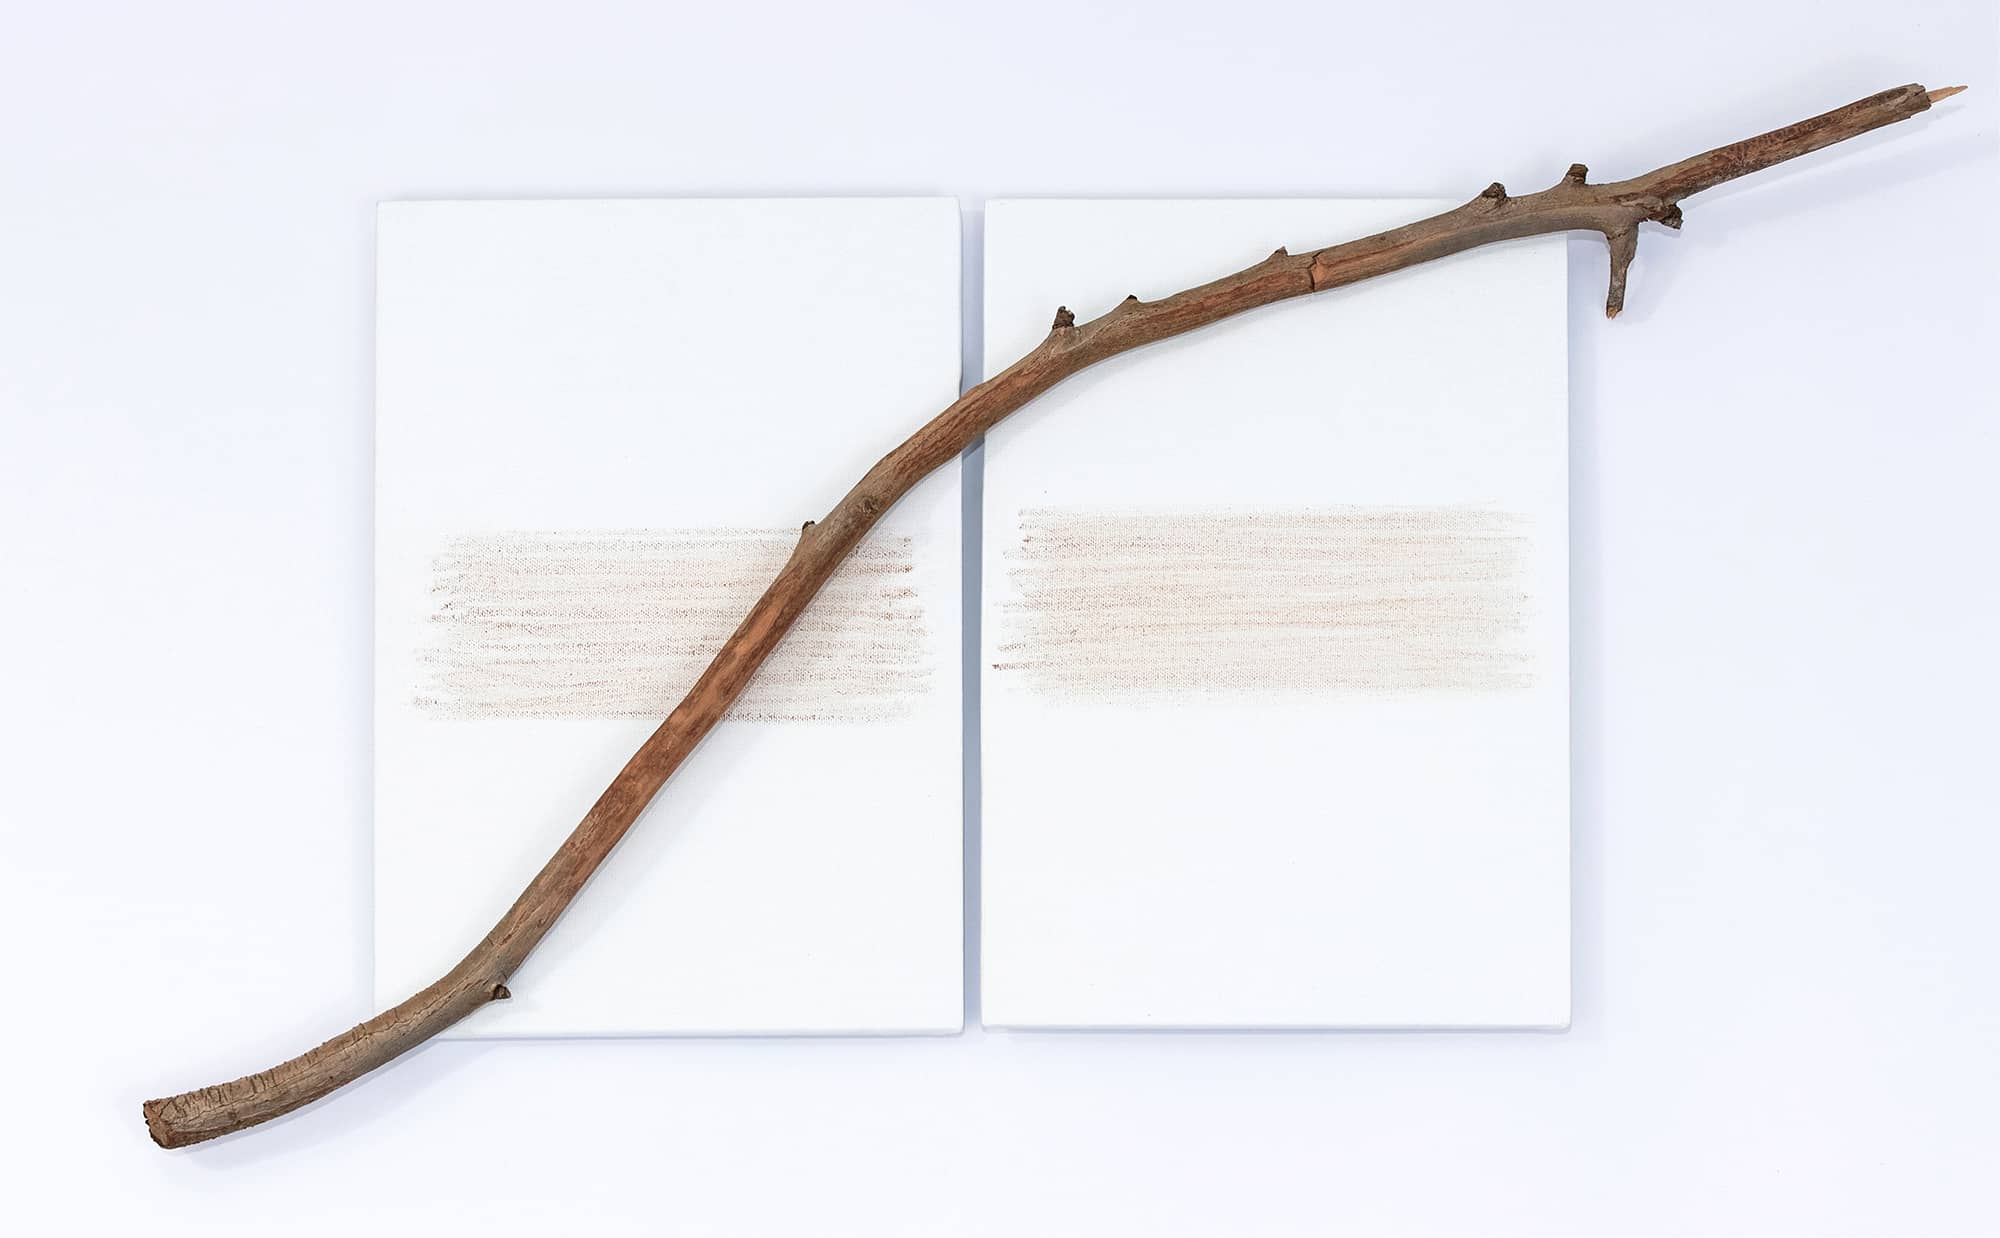 'Eucalyptus', assemblage (eucalyptus branch mounted on two canvas boards and natural pigment on canvas). Artwork by Francesca Virginia Coppola